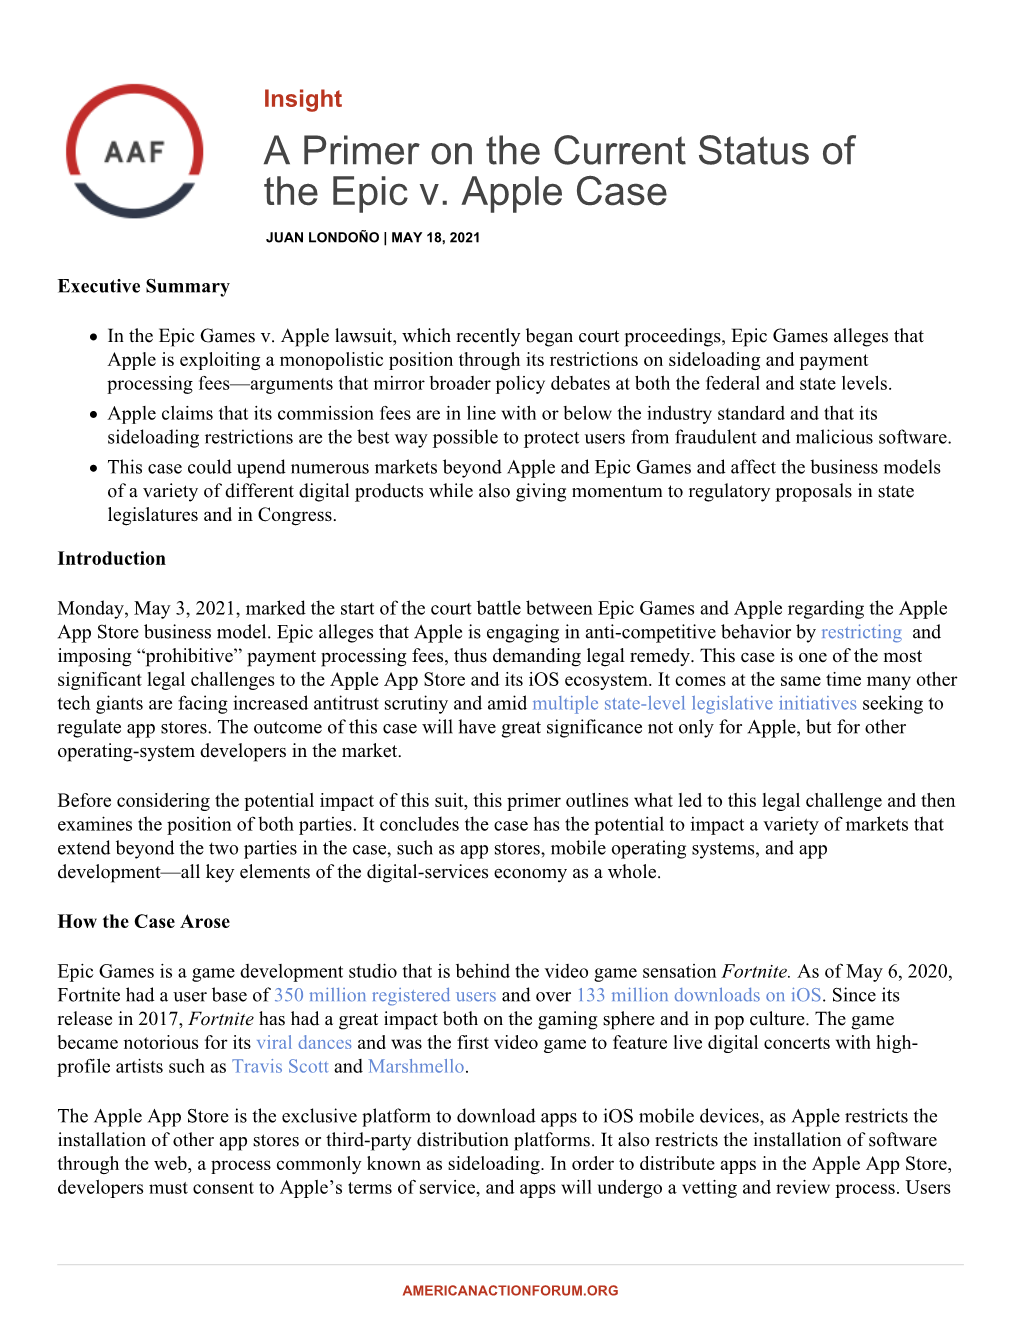 A Primer on the Current Status of the Epic V. Apple Case